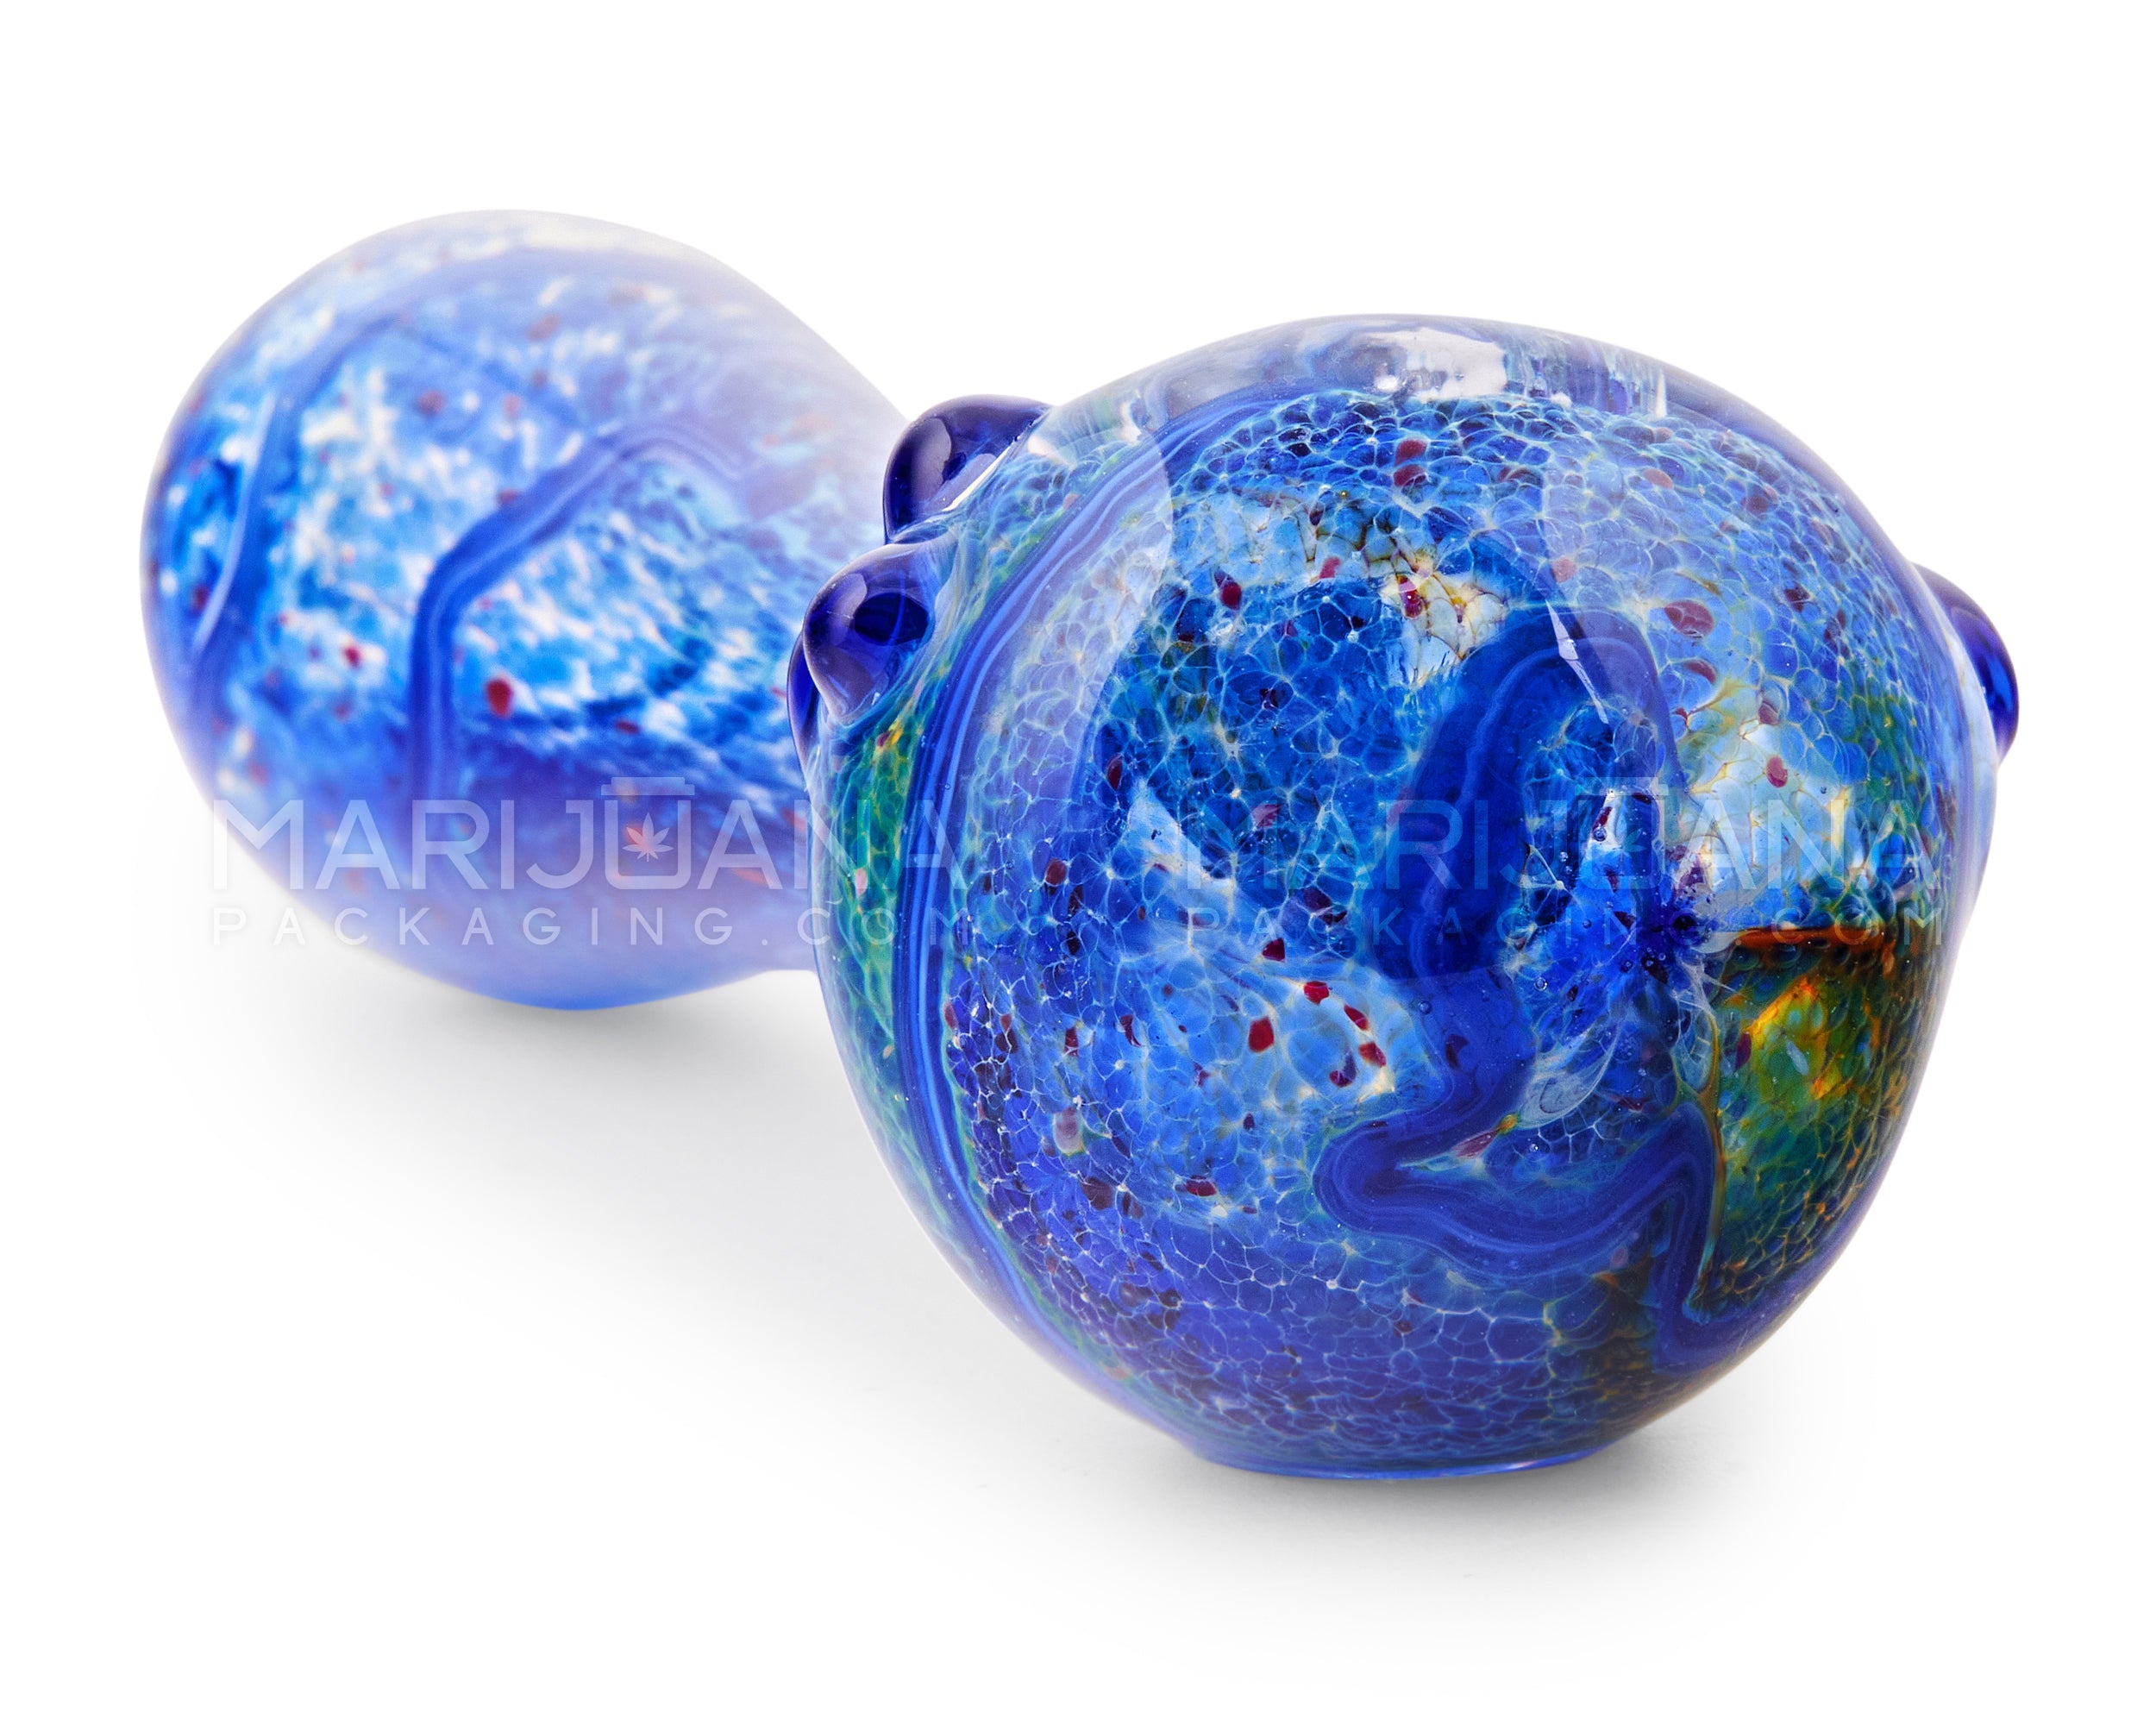 Frit & Fumed Spiral Spoon Hand Pipe w/ Triple Knockers | 4.5in Long - Glass - Assorted - 5